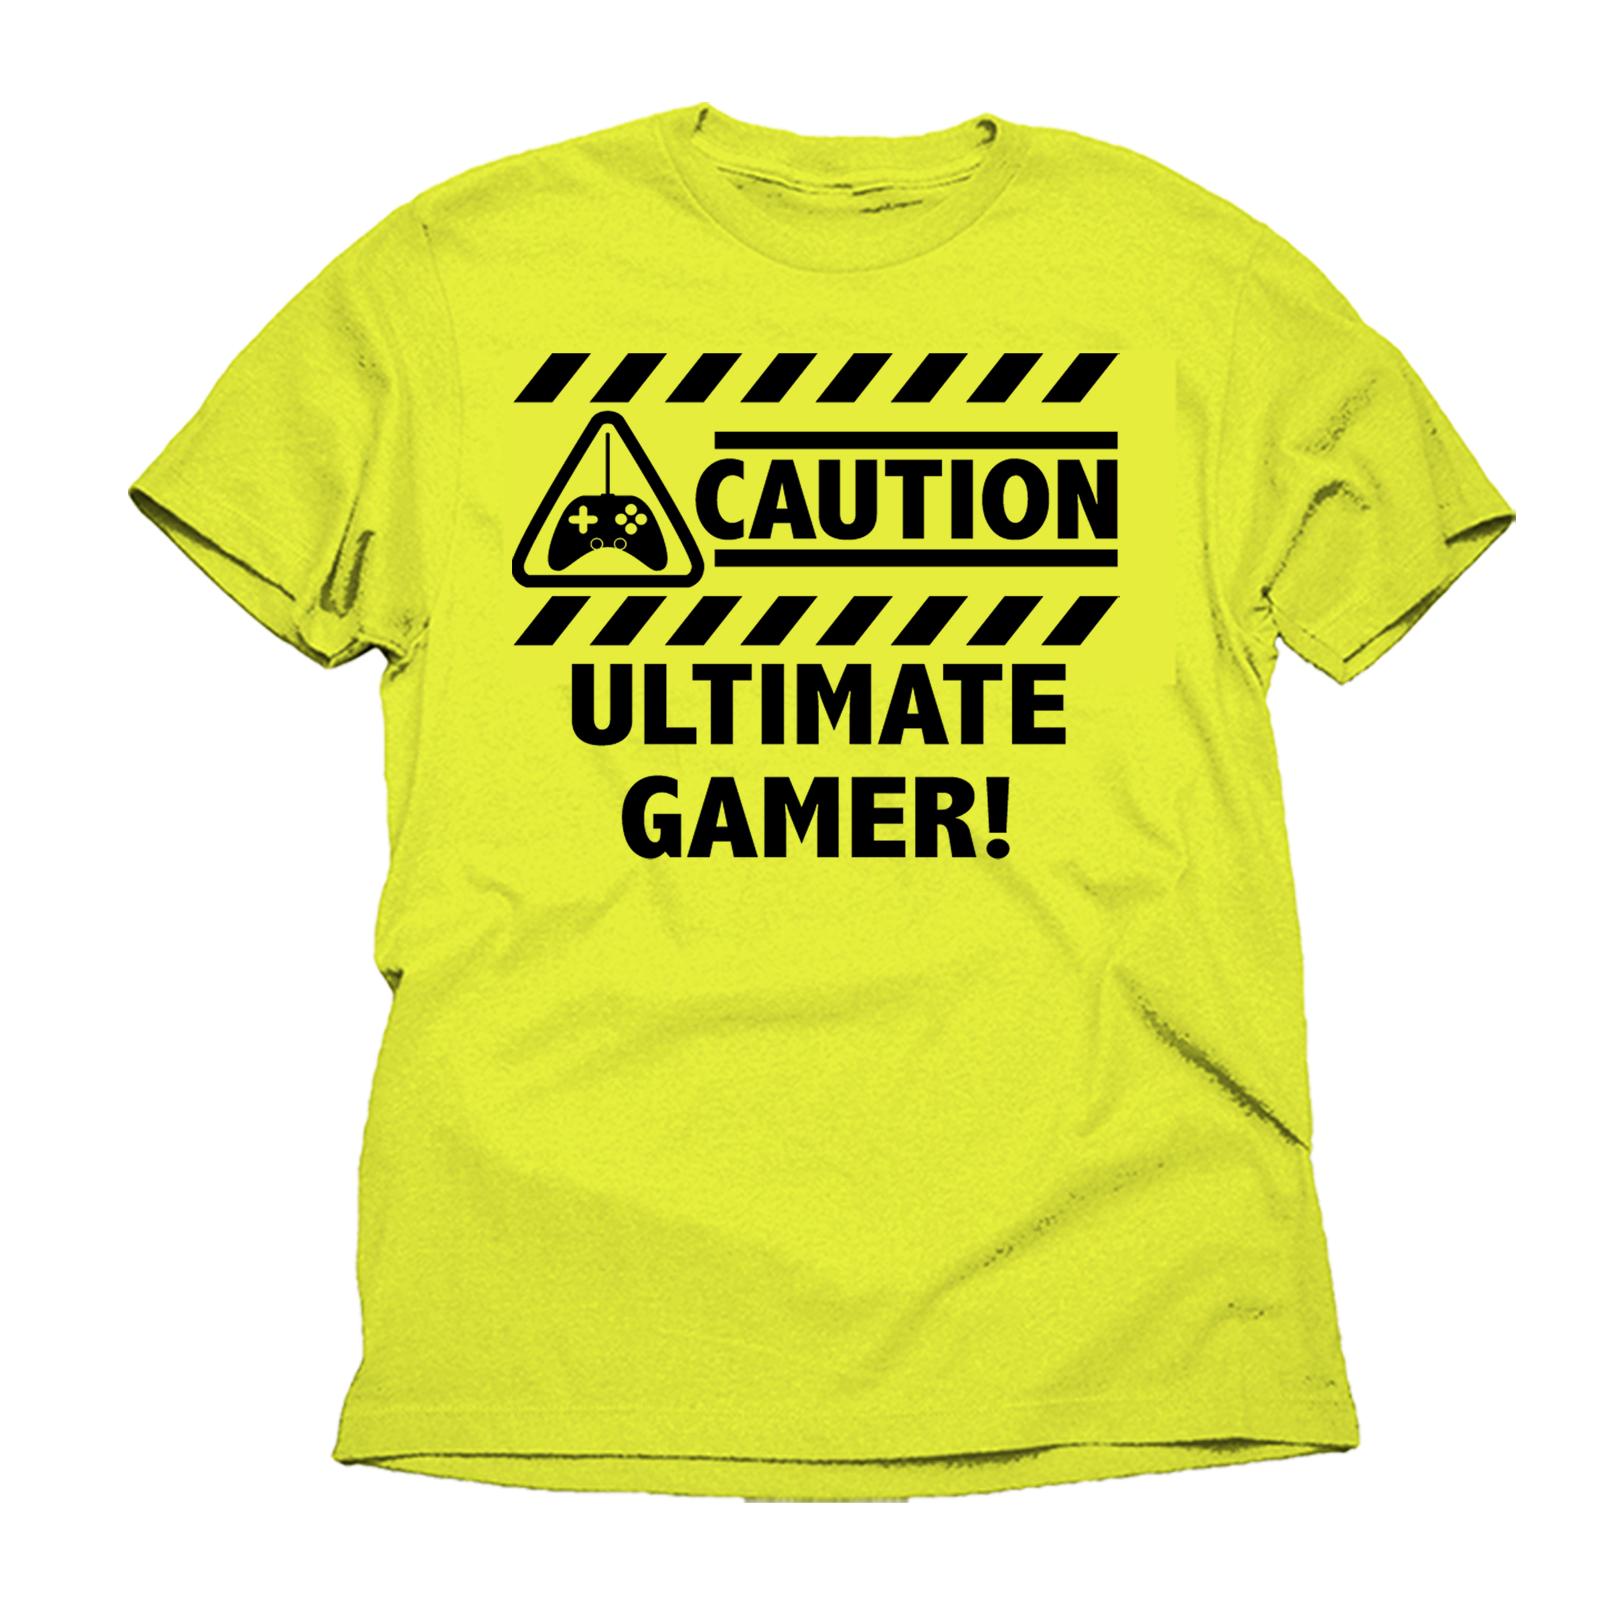 Route 66 Boy's Graphic T-Shirt - Ultimate Gamer